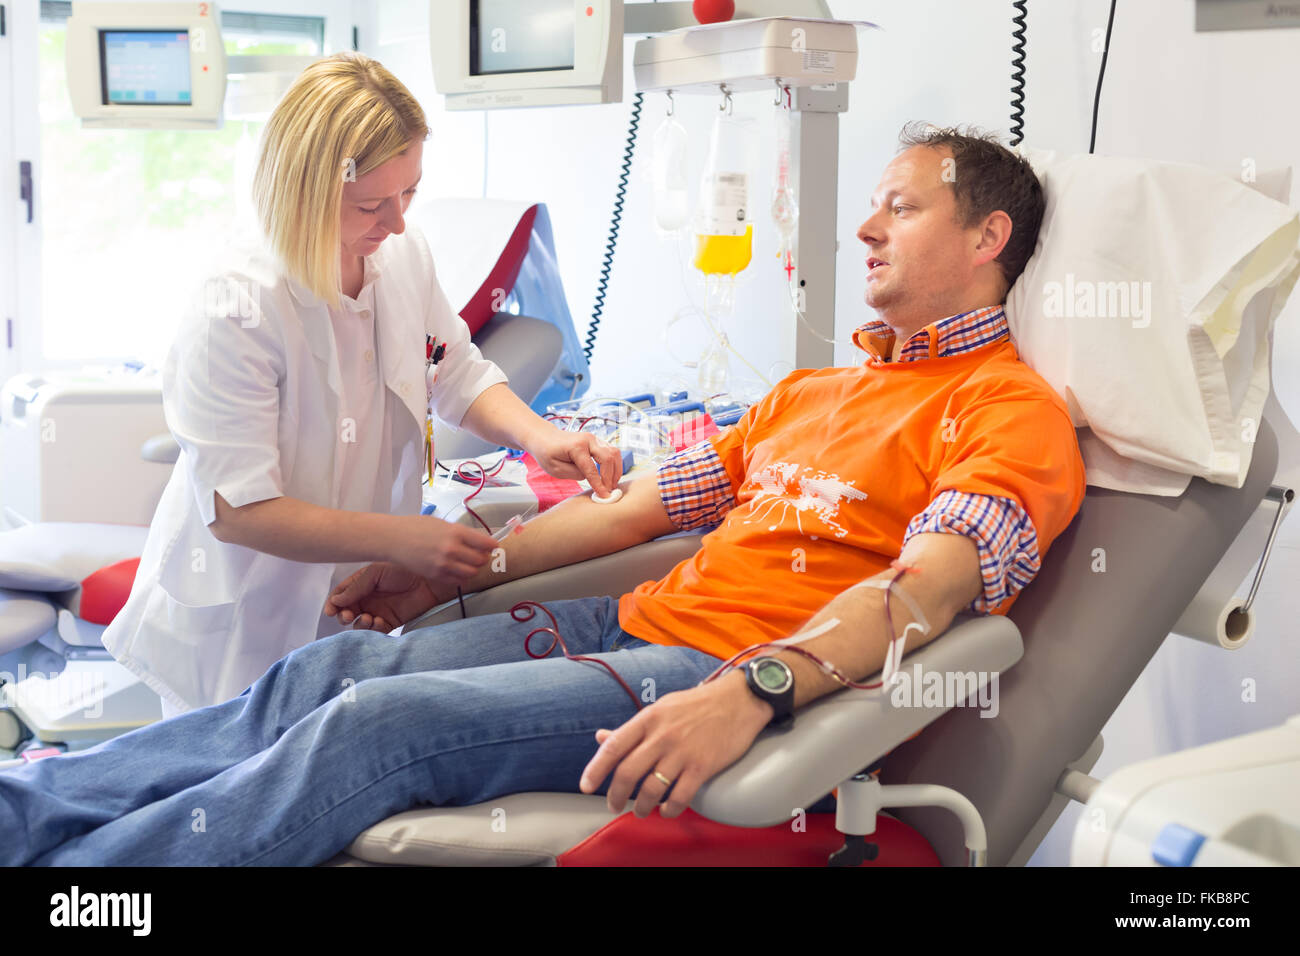 Blood donor at donation. Stock Photo